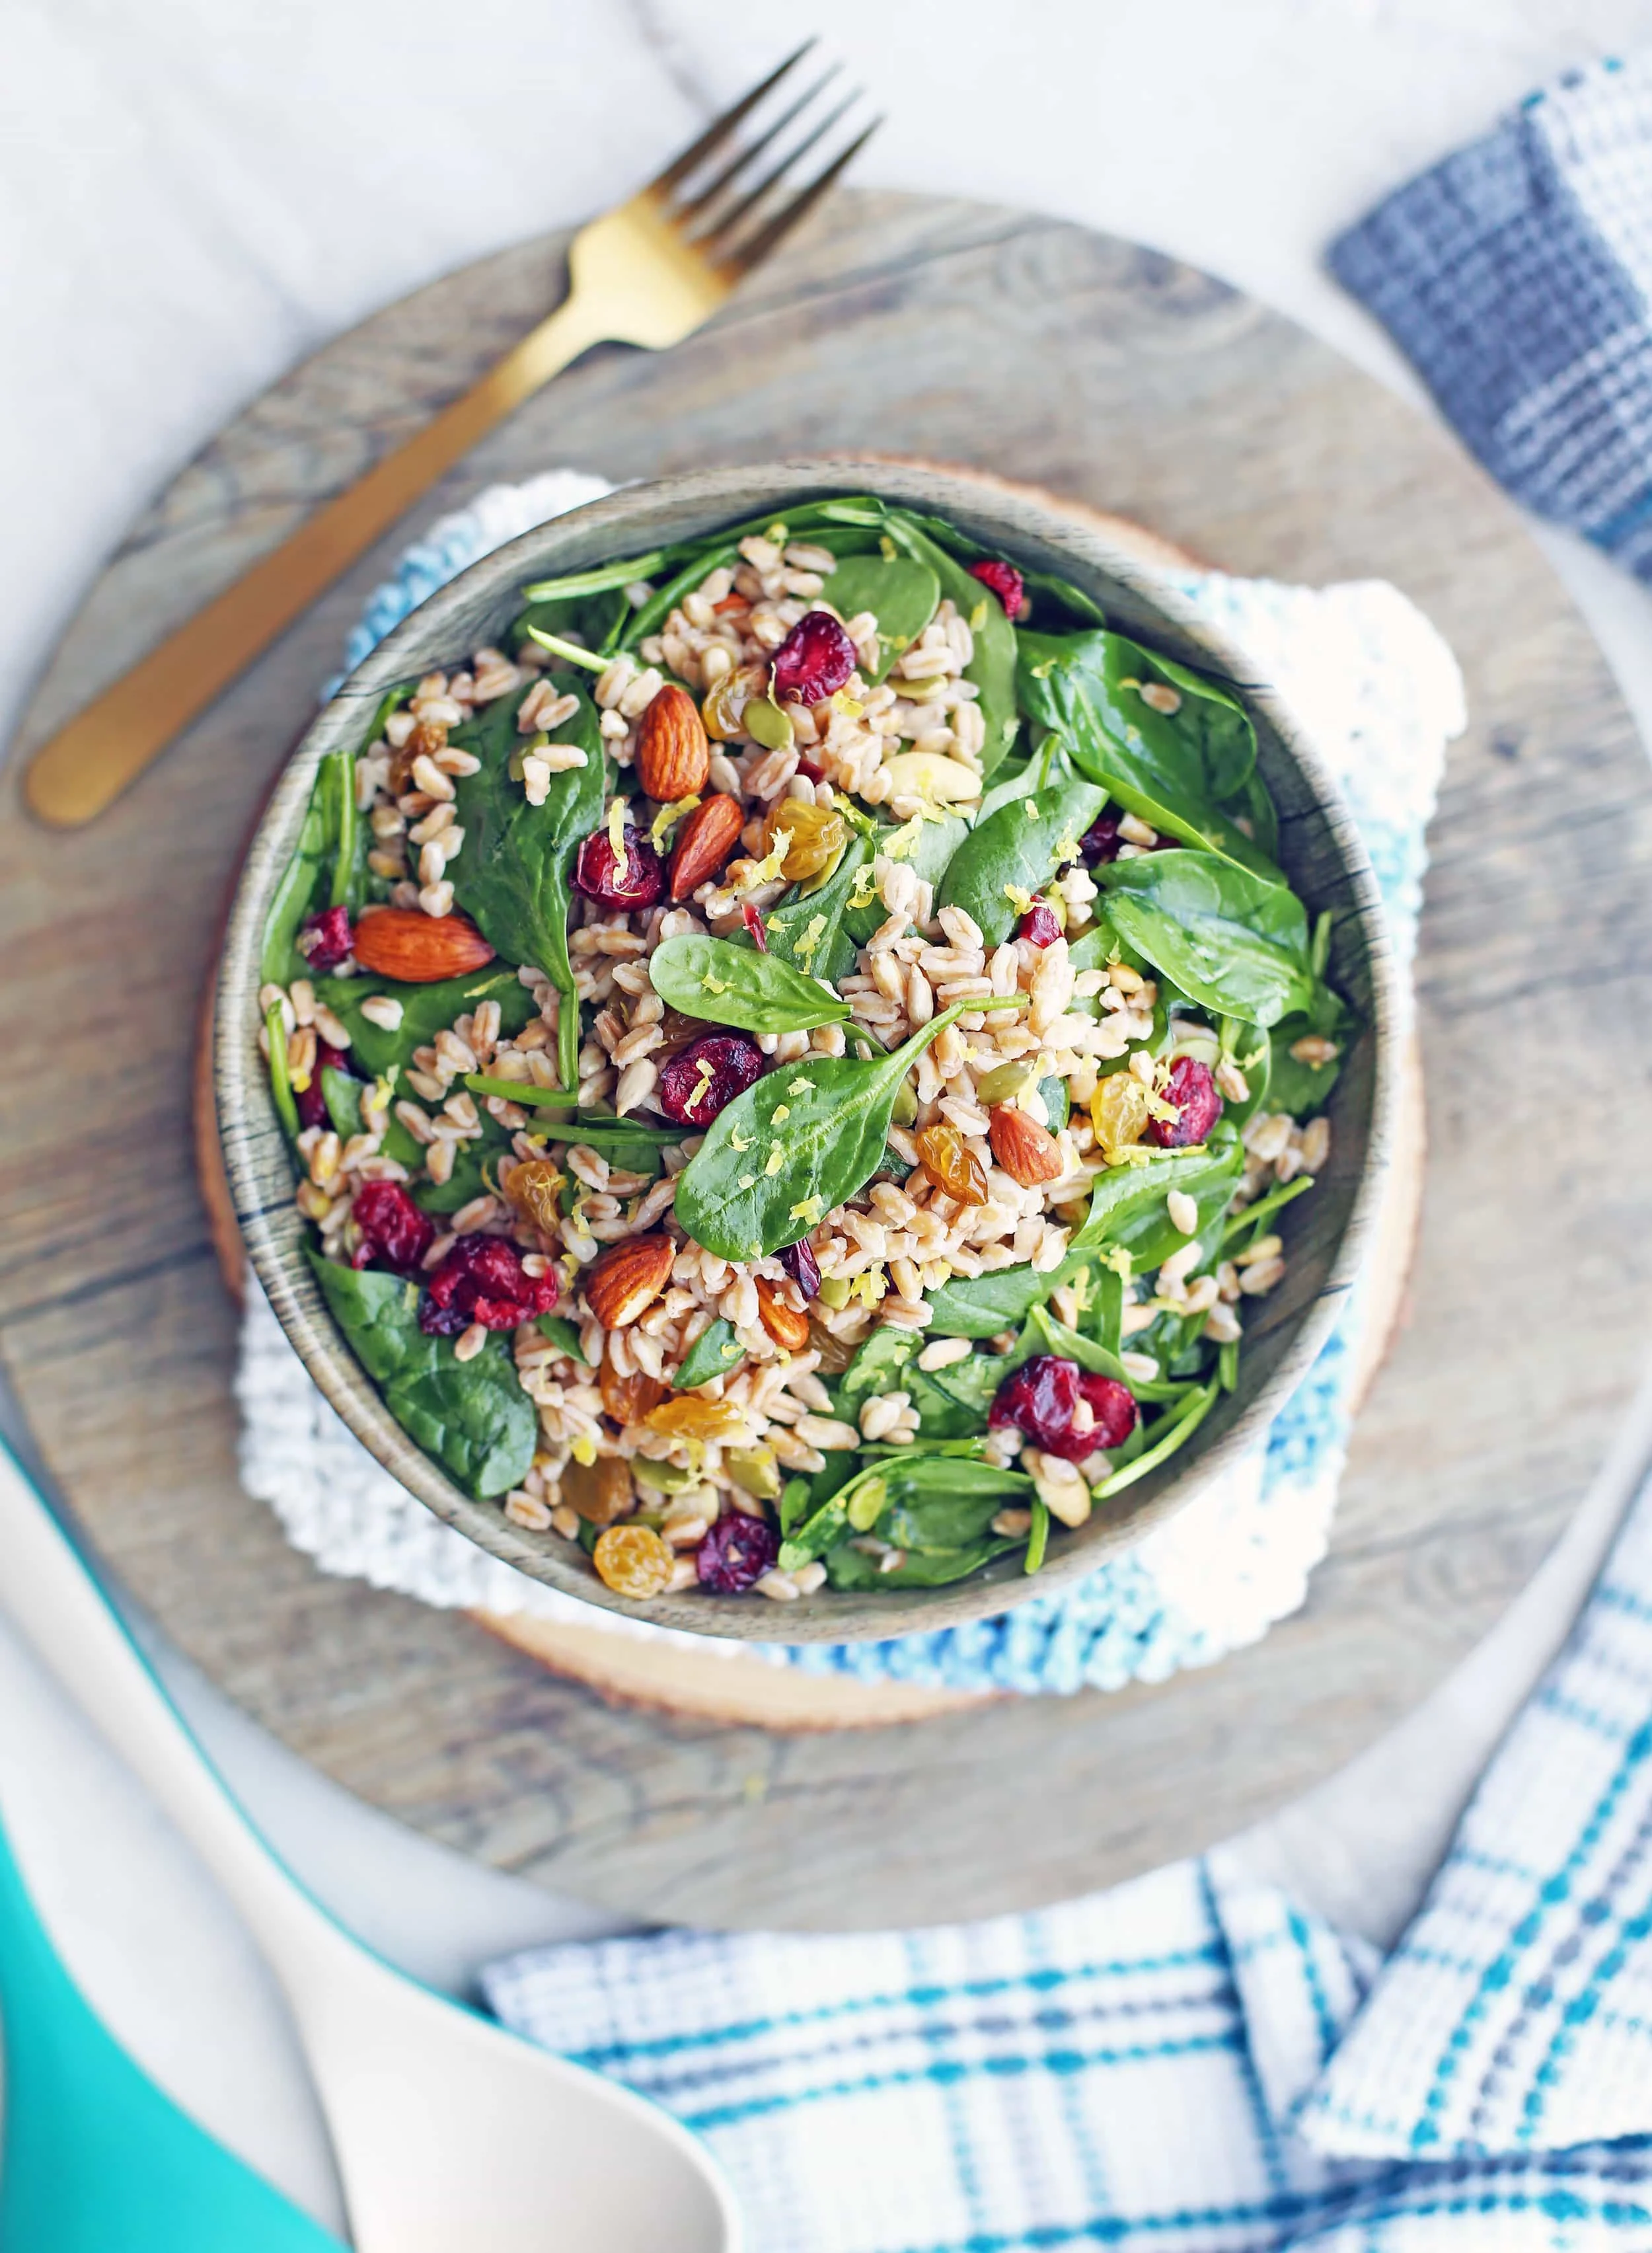 Overhead view of a salad containing farro, baby spinach, dried fruit, nuts, and seeds in a wooden bowl.